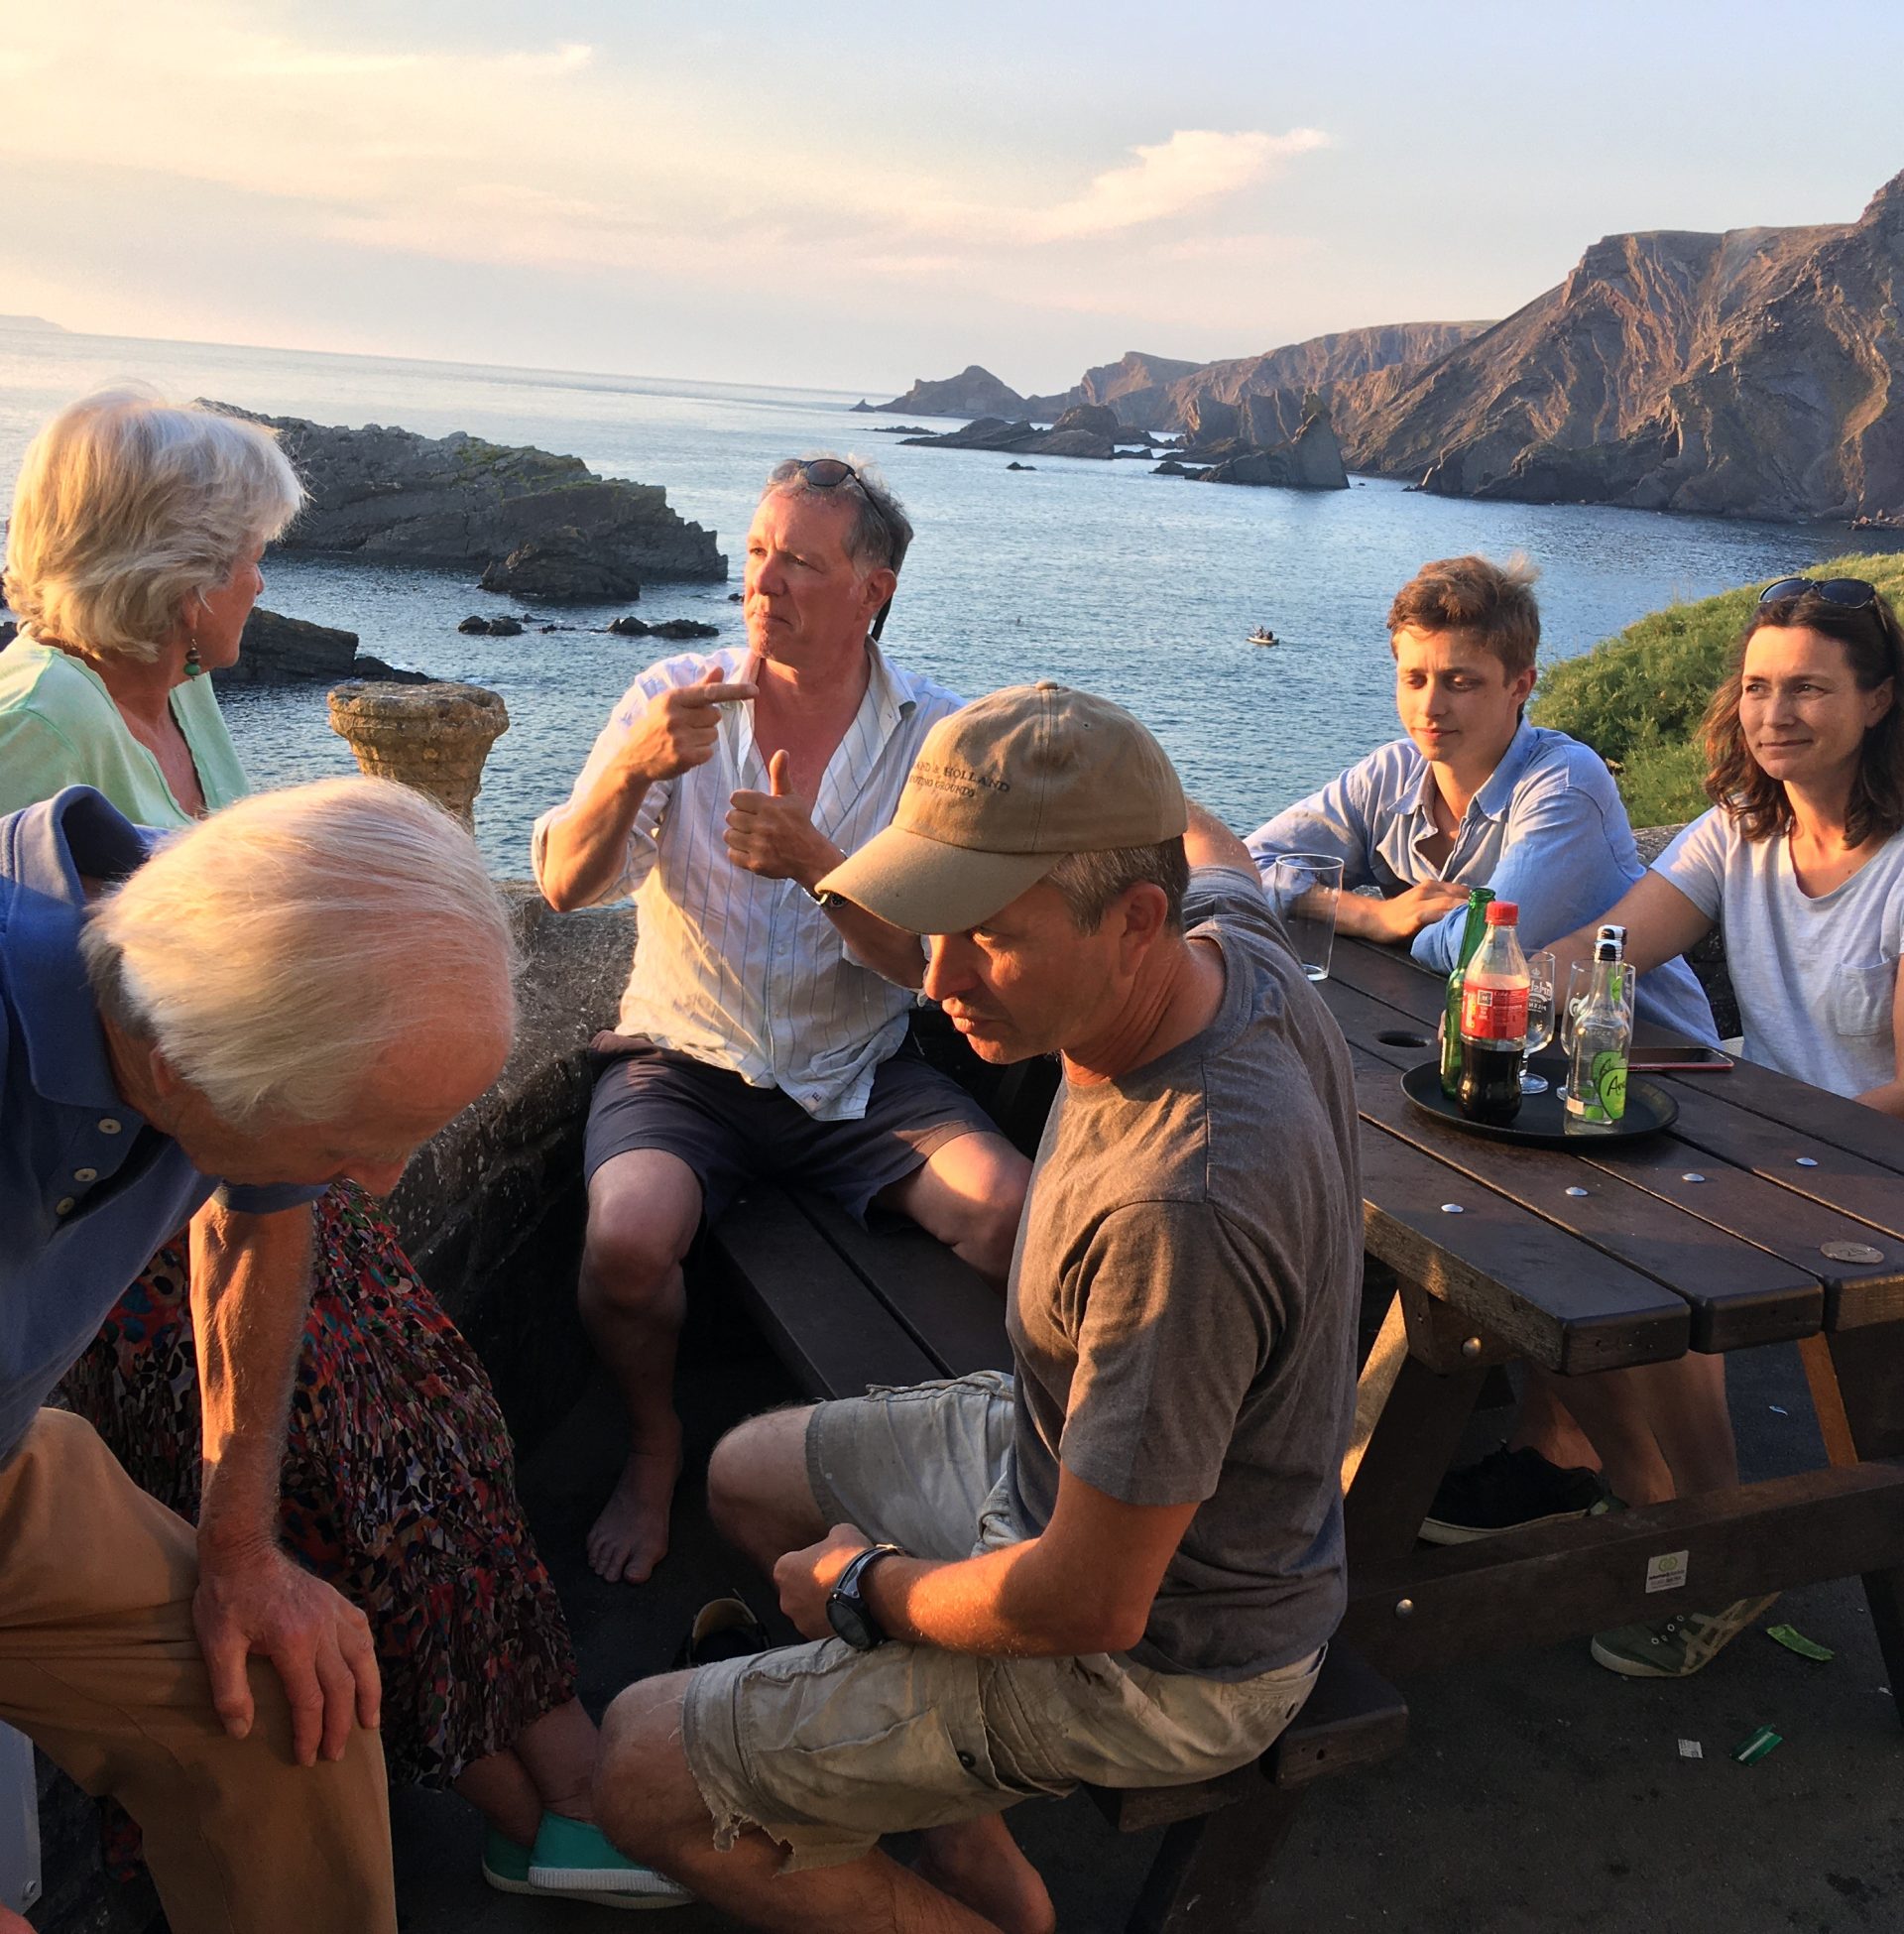 Group of people gathered for food and drinks on picnic table in beer garden of Hartland Quay, with rugged coastline in background